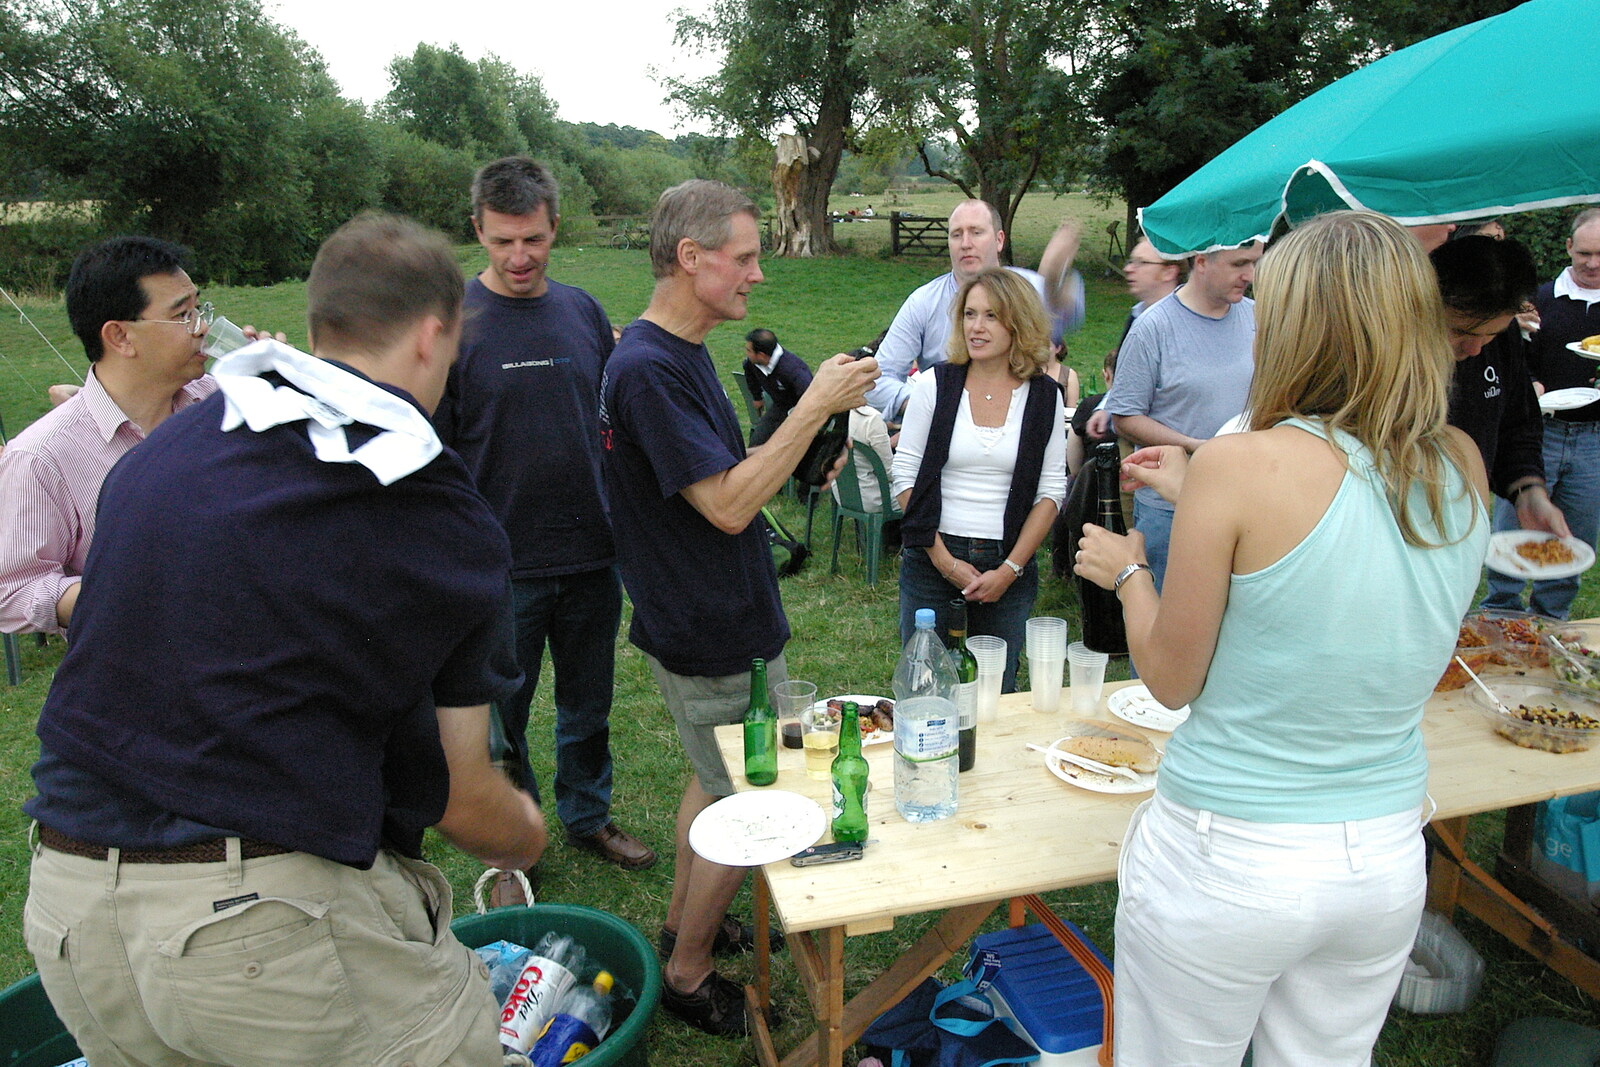 Tim with Peggy Johnson from Qualcomm goes Punting on the Cam, Grantchester Meadows, Cambridge - 18th August 2005